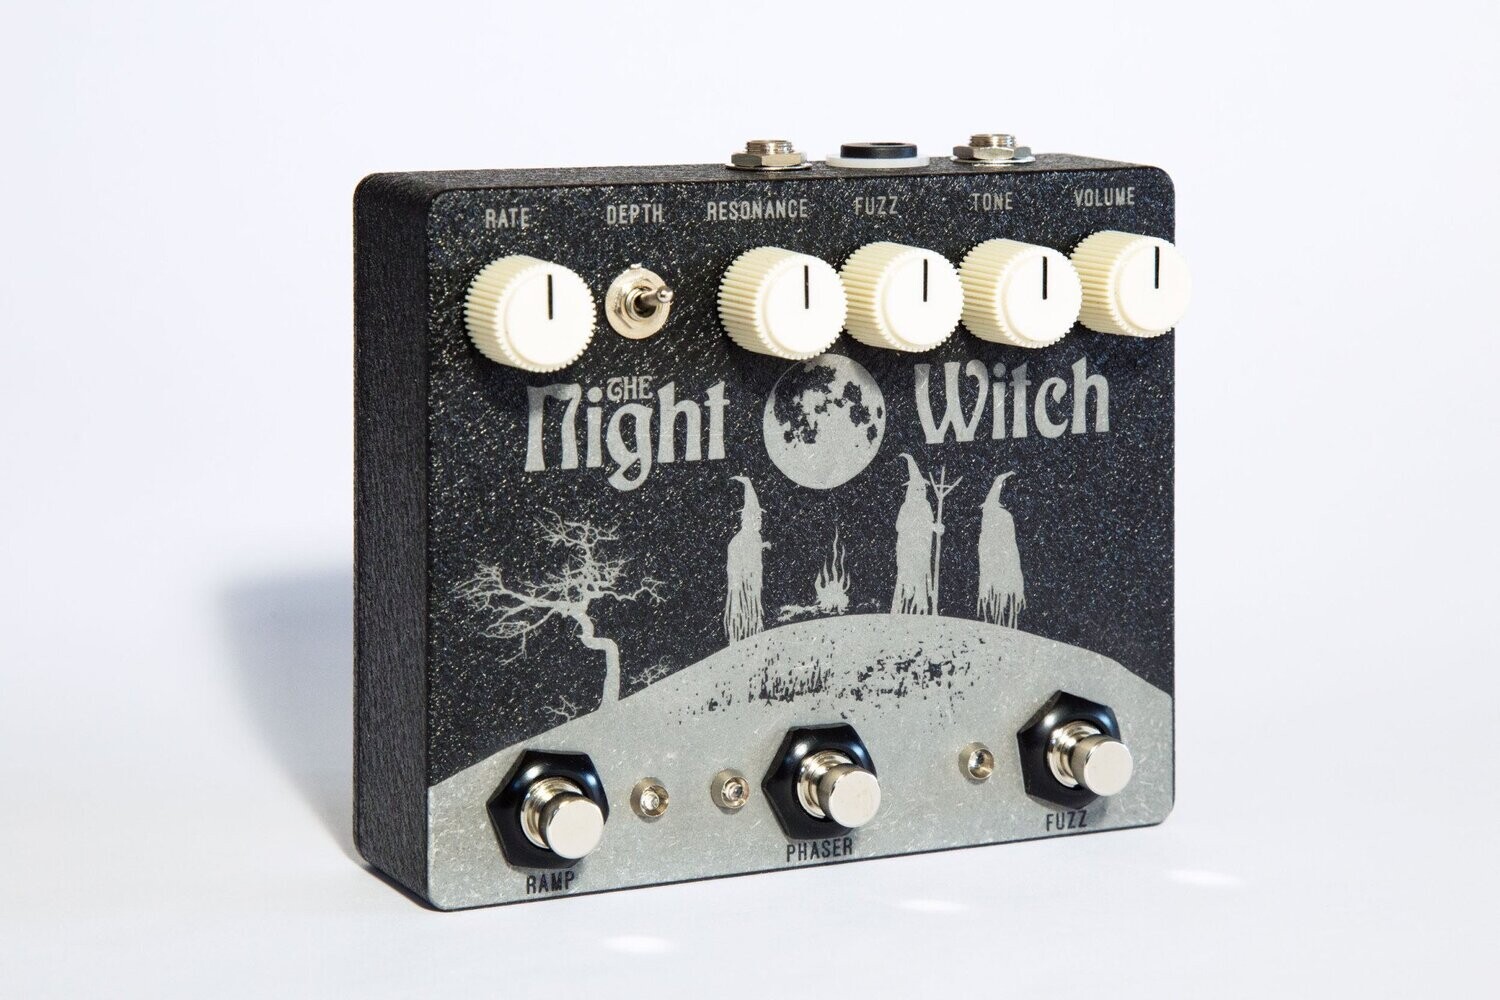 The Night Witch Guitar Pedal